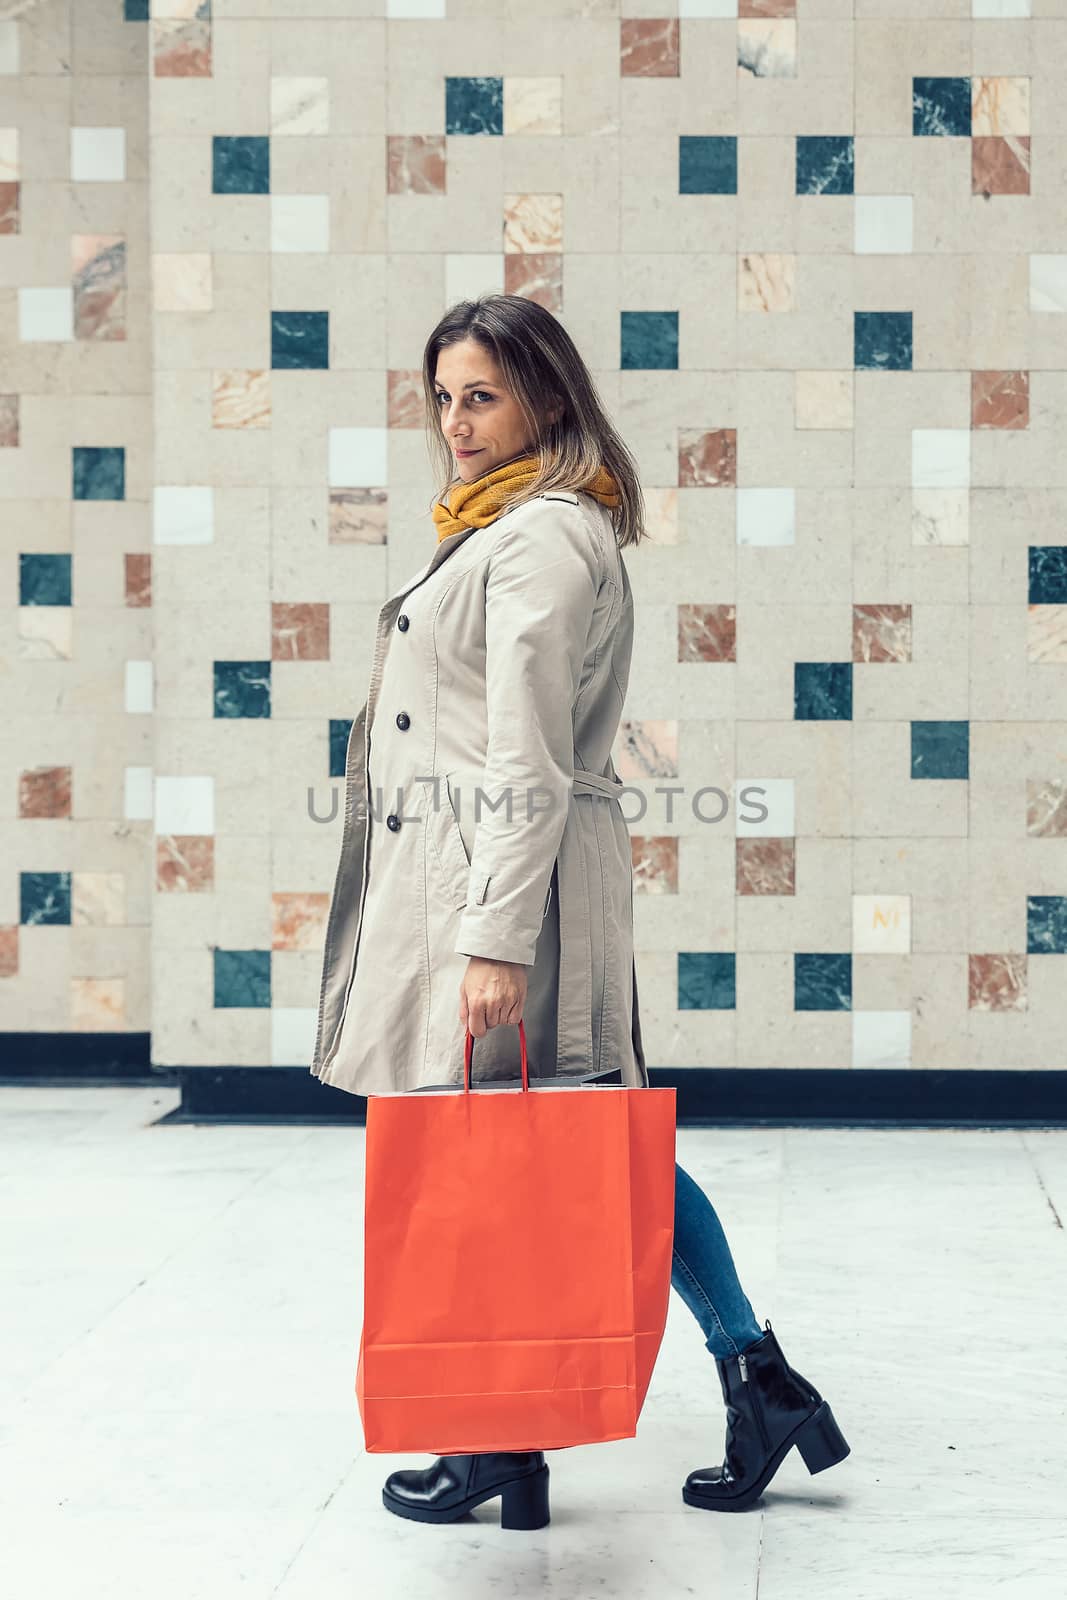 Adult woman walking through a mall with colorful shopping bags. by JRPazos